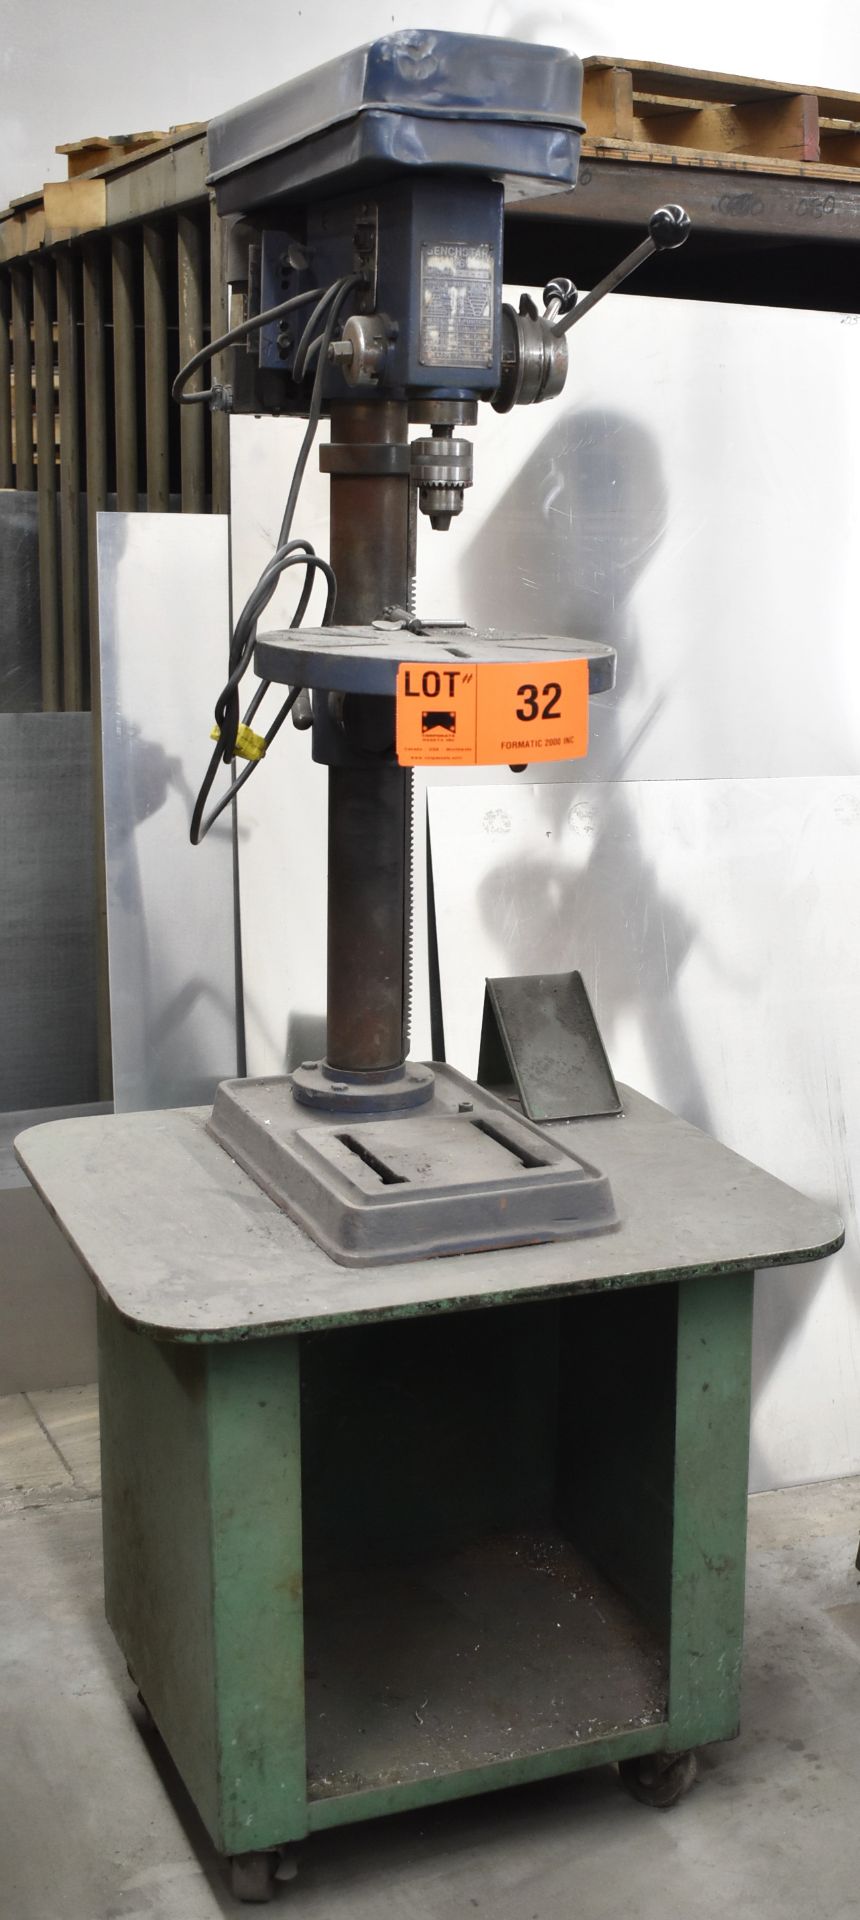 BENCHSTAR 16" BENCH-TYPE DRILL PRESS WITH STAND, 12" DIA. TABLE, SPEEDS TO 2400 RPM, S/N: 76039